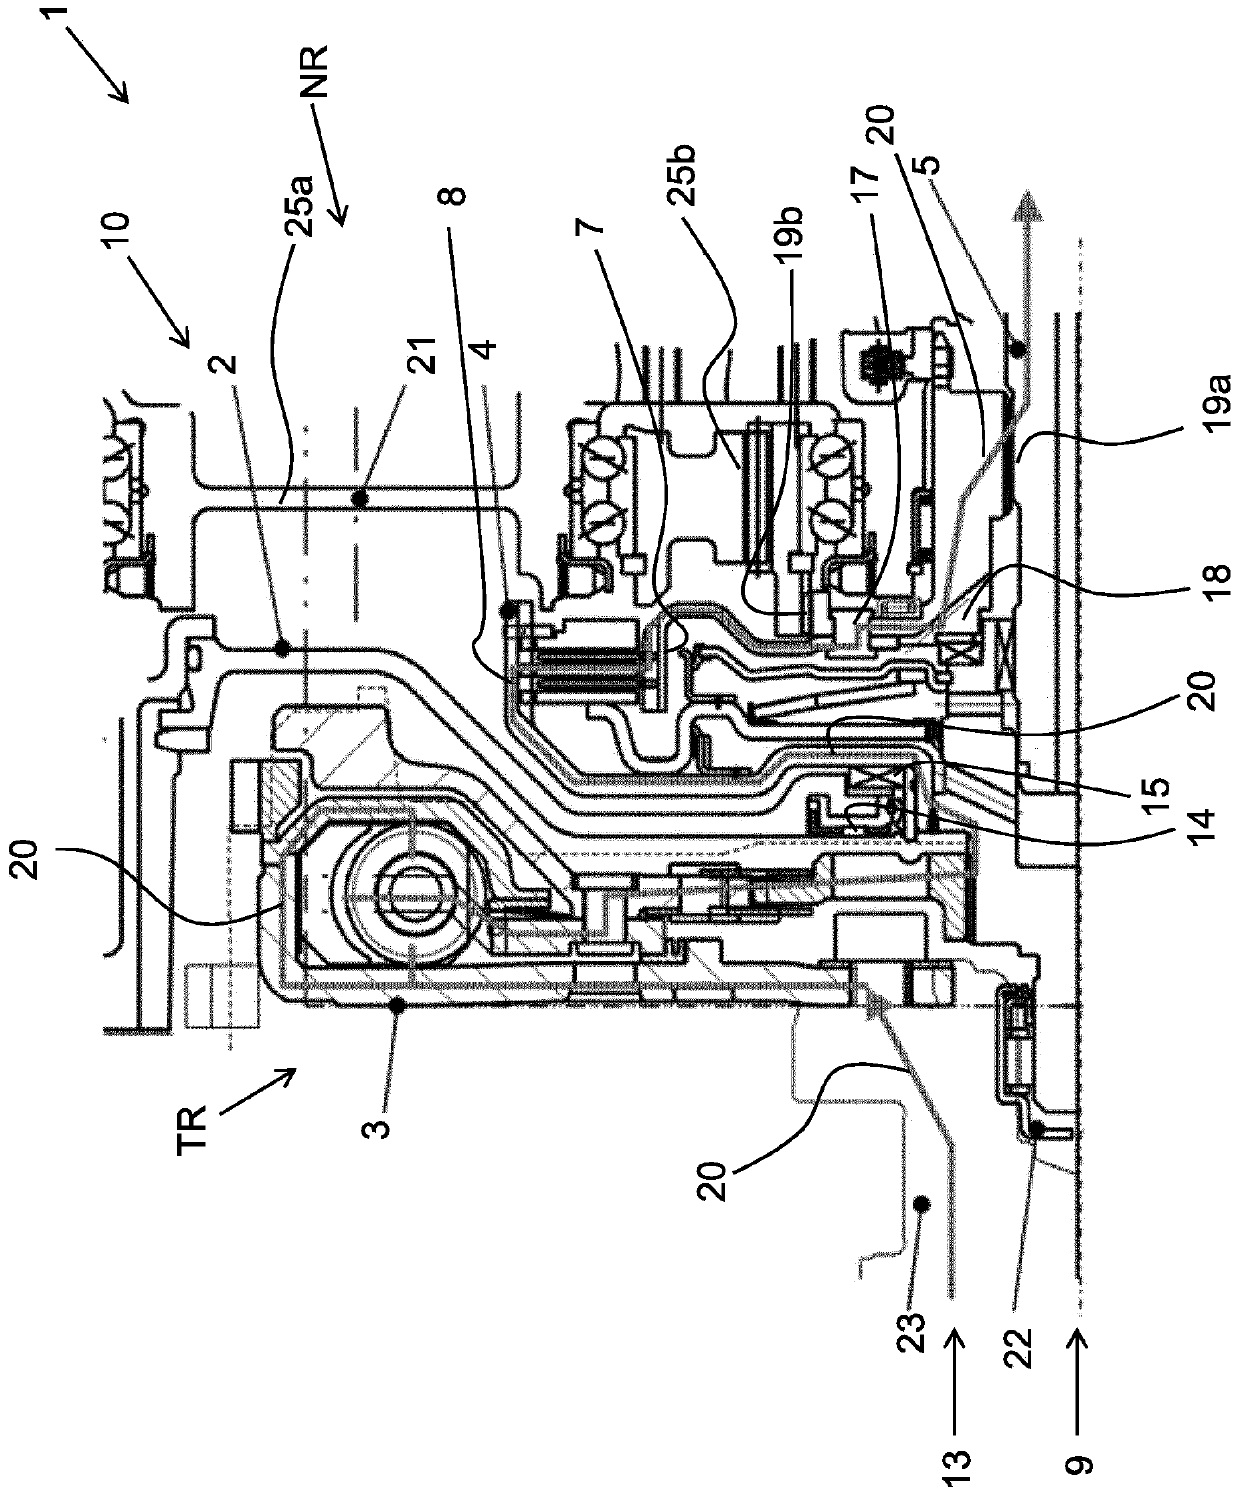 Transmission arrangement for a transmission of a vehicle or the like